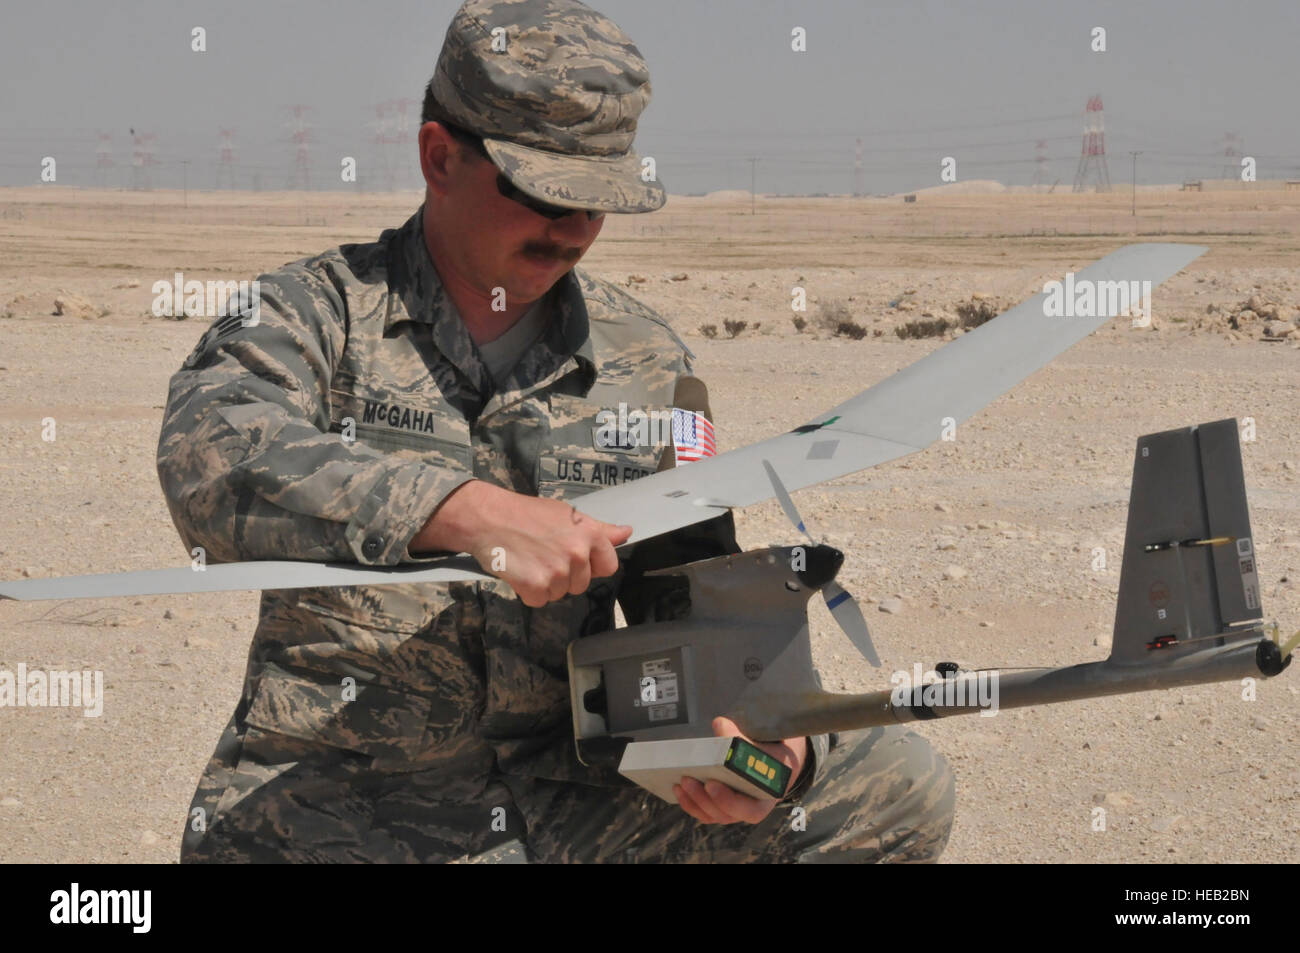 Senior Airman James McGaha, 379th Expeditionary Security Force Squadron patrolman, recovers parts of the Raven B Digital Data Link drone, after one of its flight missions Feb. 19 at Al Udeid Air Base, Qatar. After completing its flight, the Raven’s wings detached after landing which can occur and is easy to fix.  Tech. Sgt. Terrica Y. Jones Stock Photo